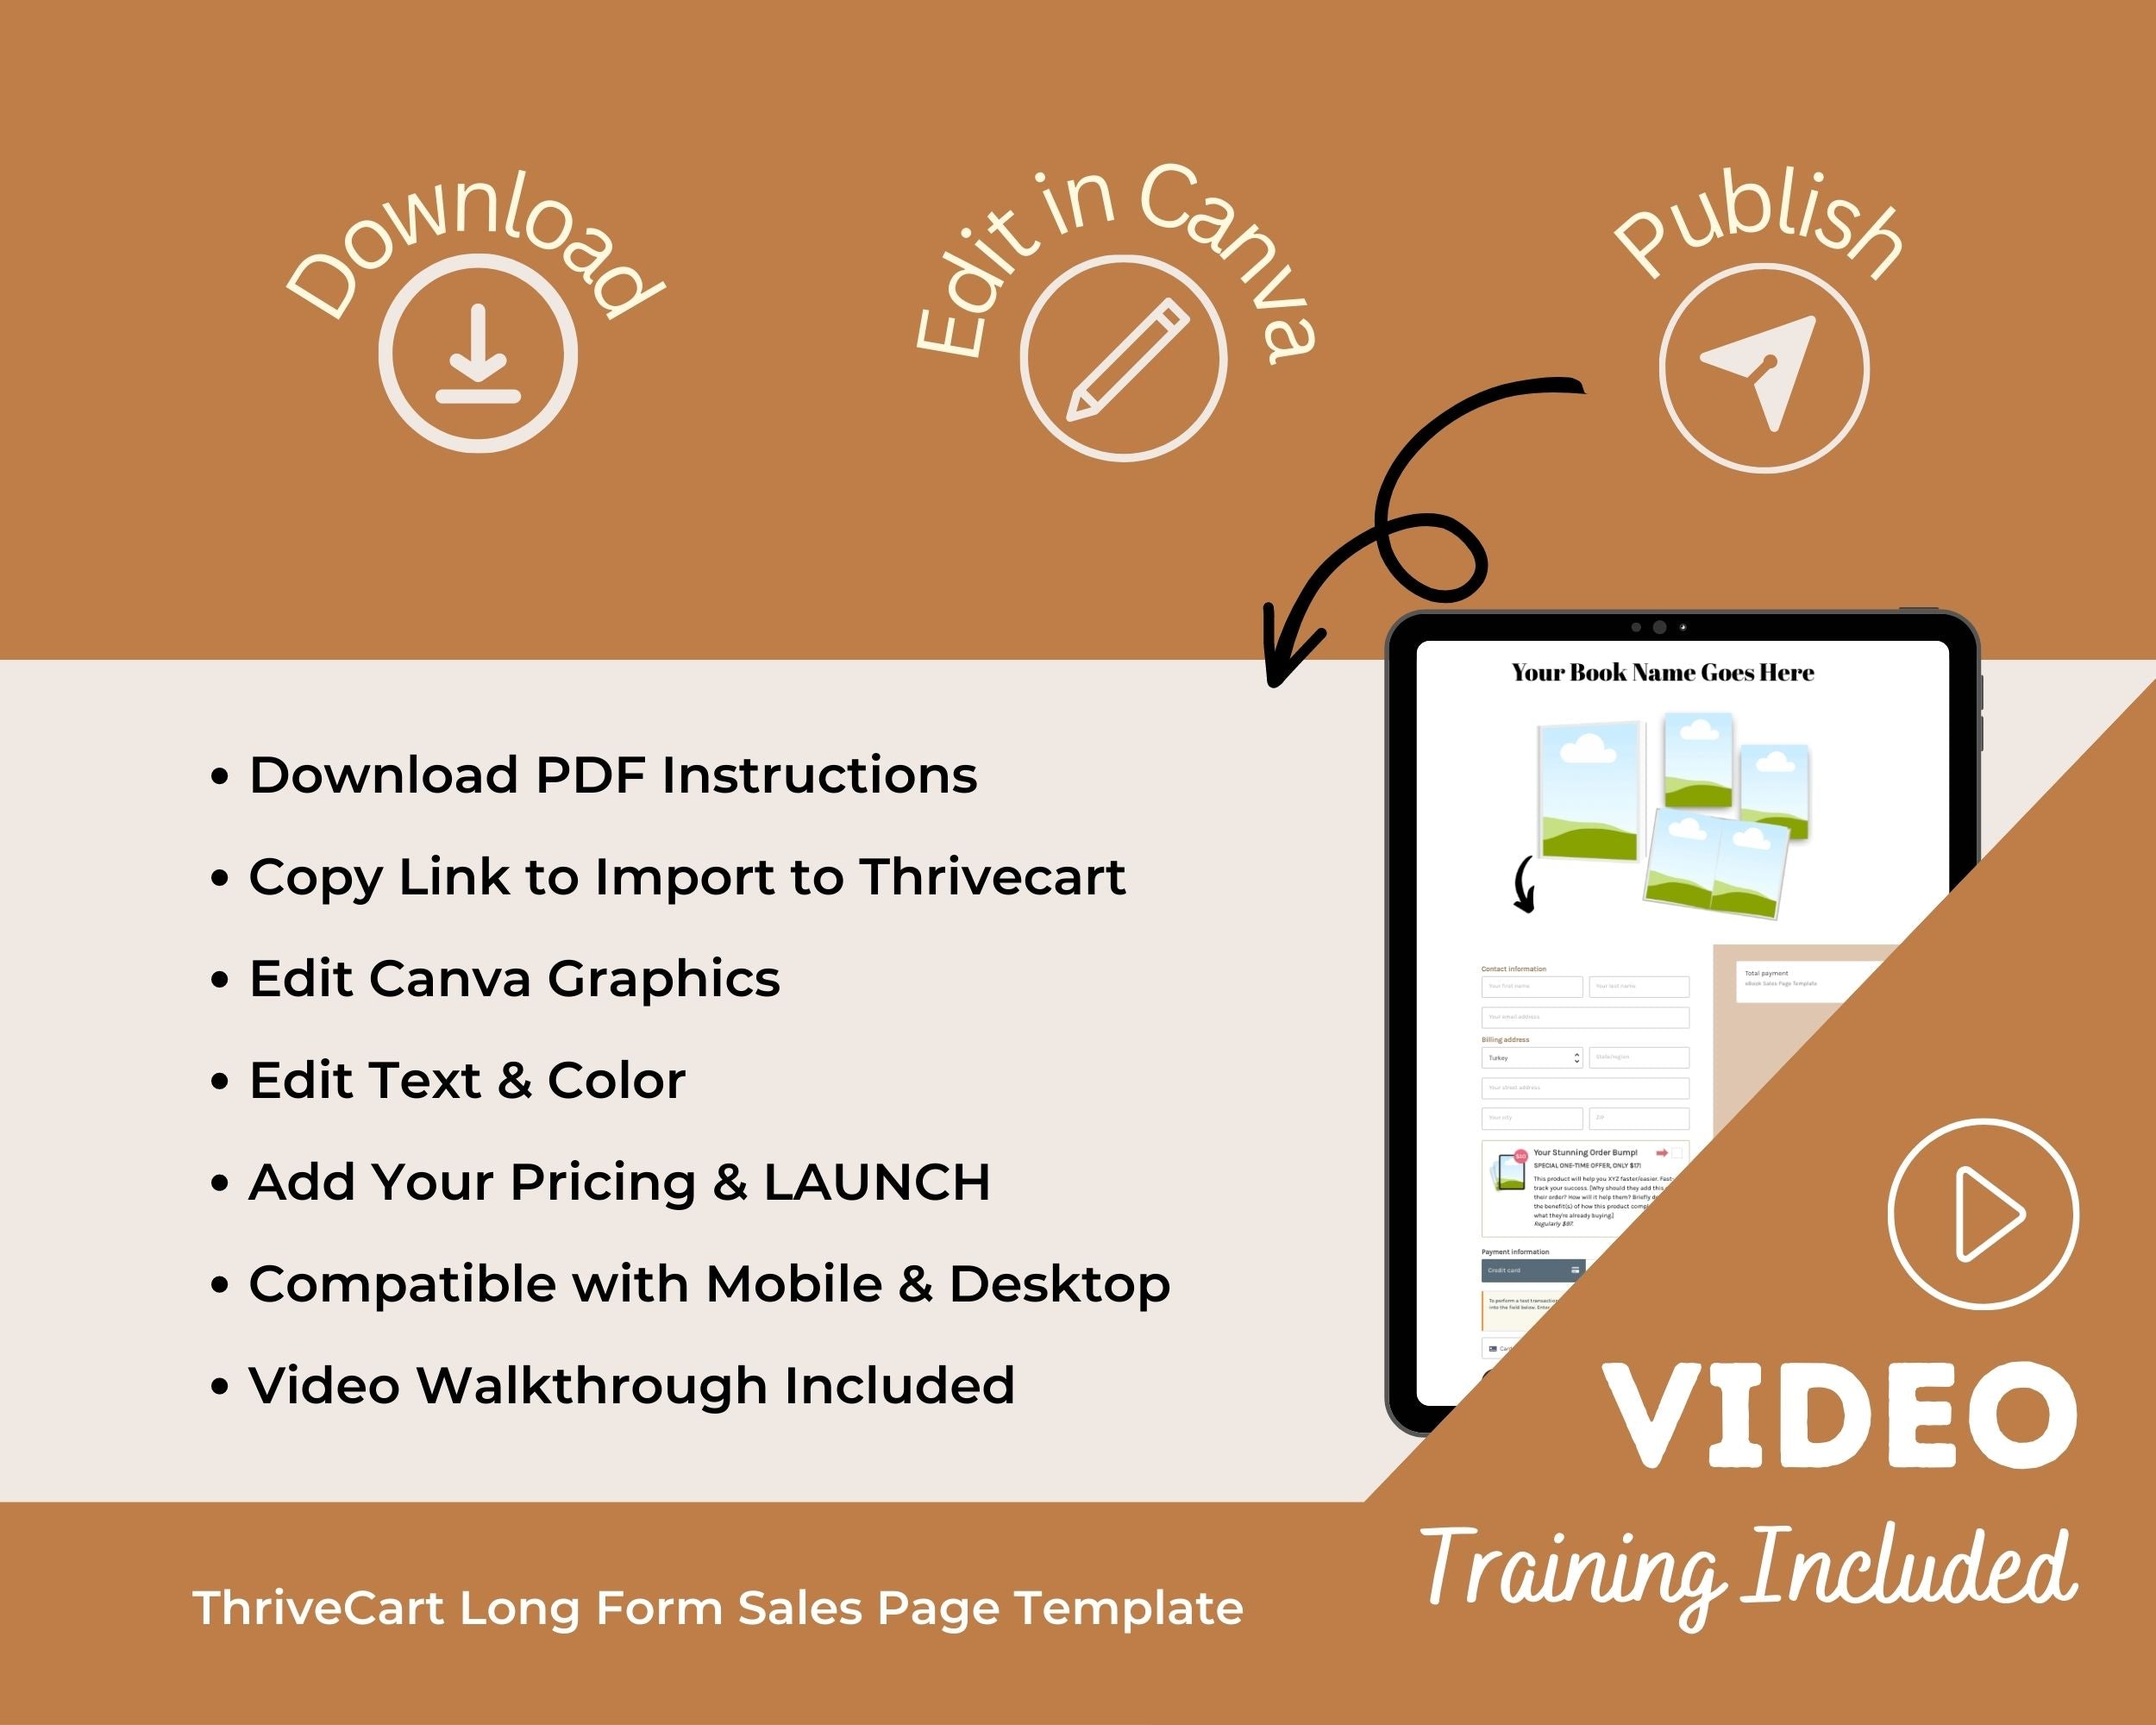 Ebook Sales Page Template in ThriveCart